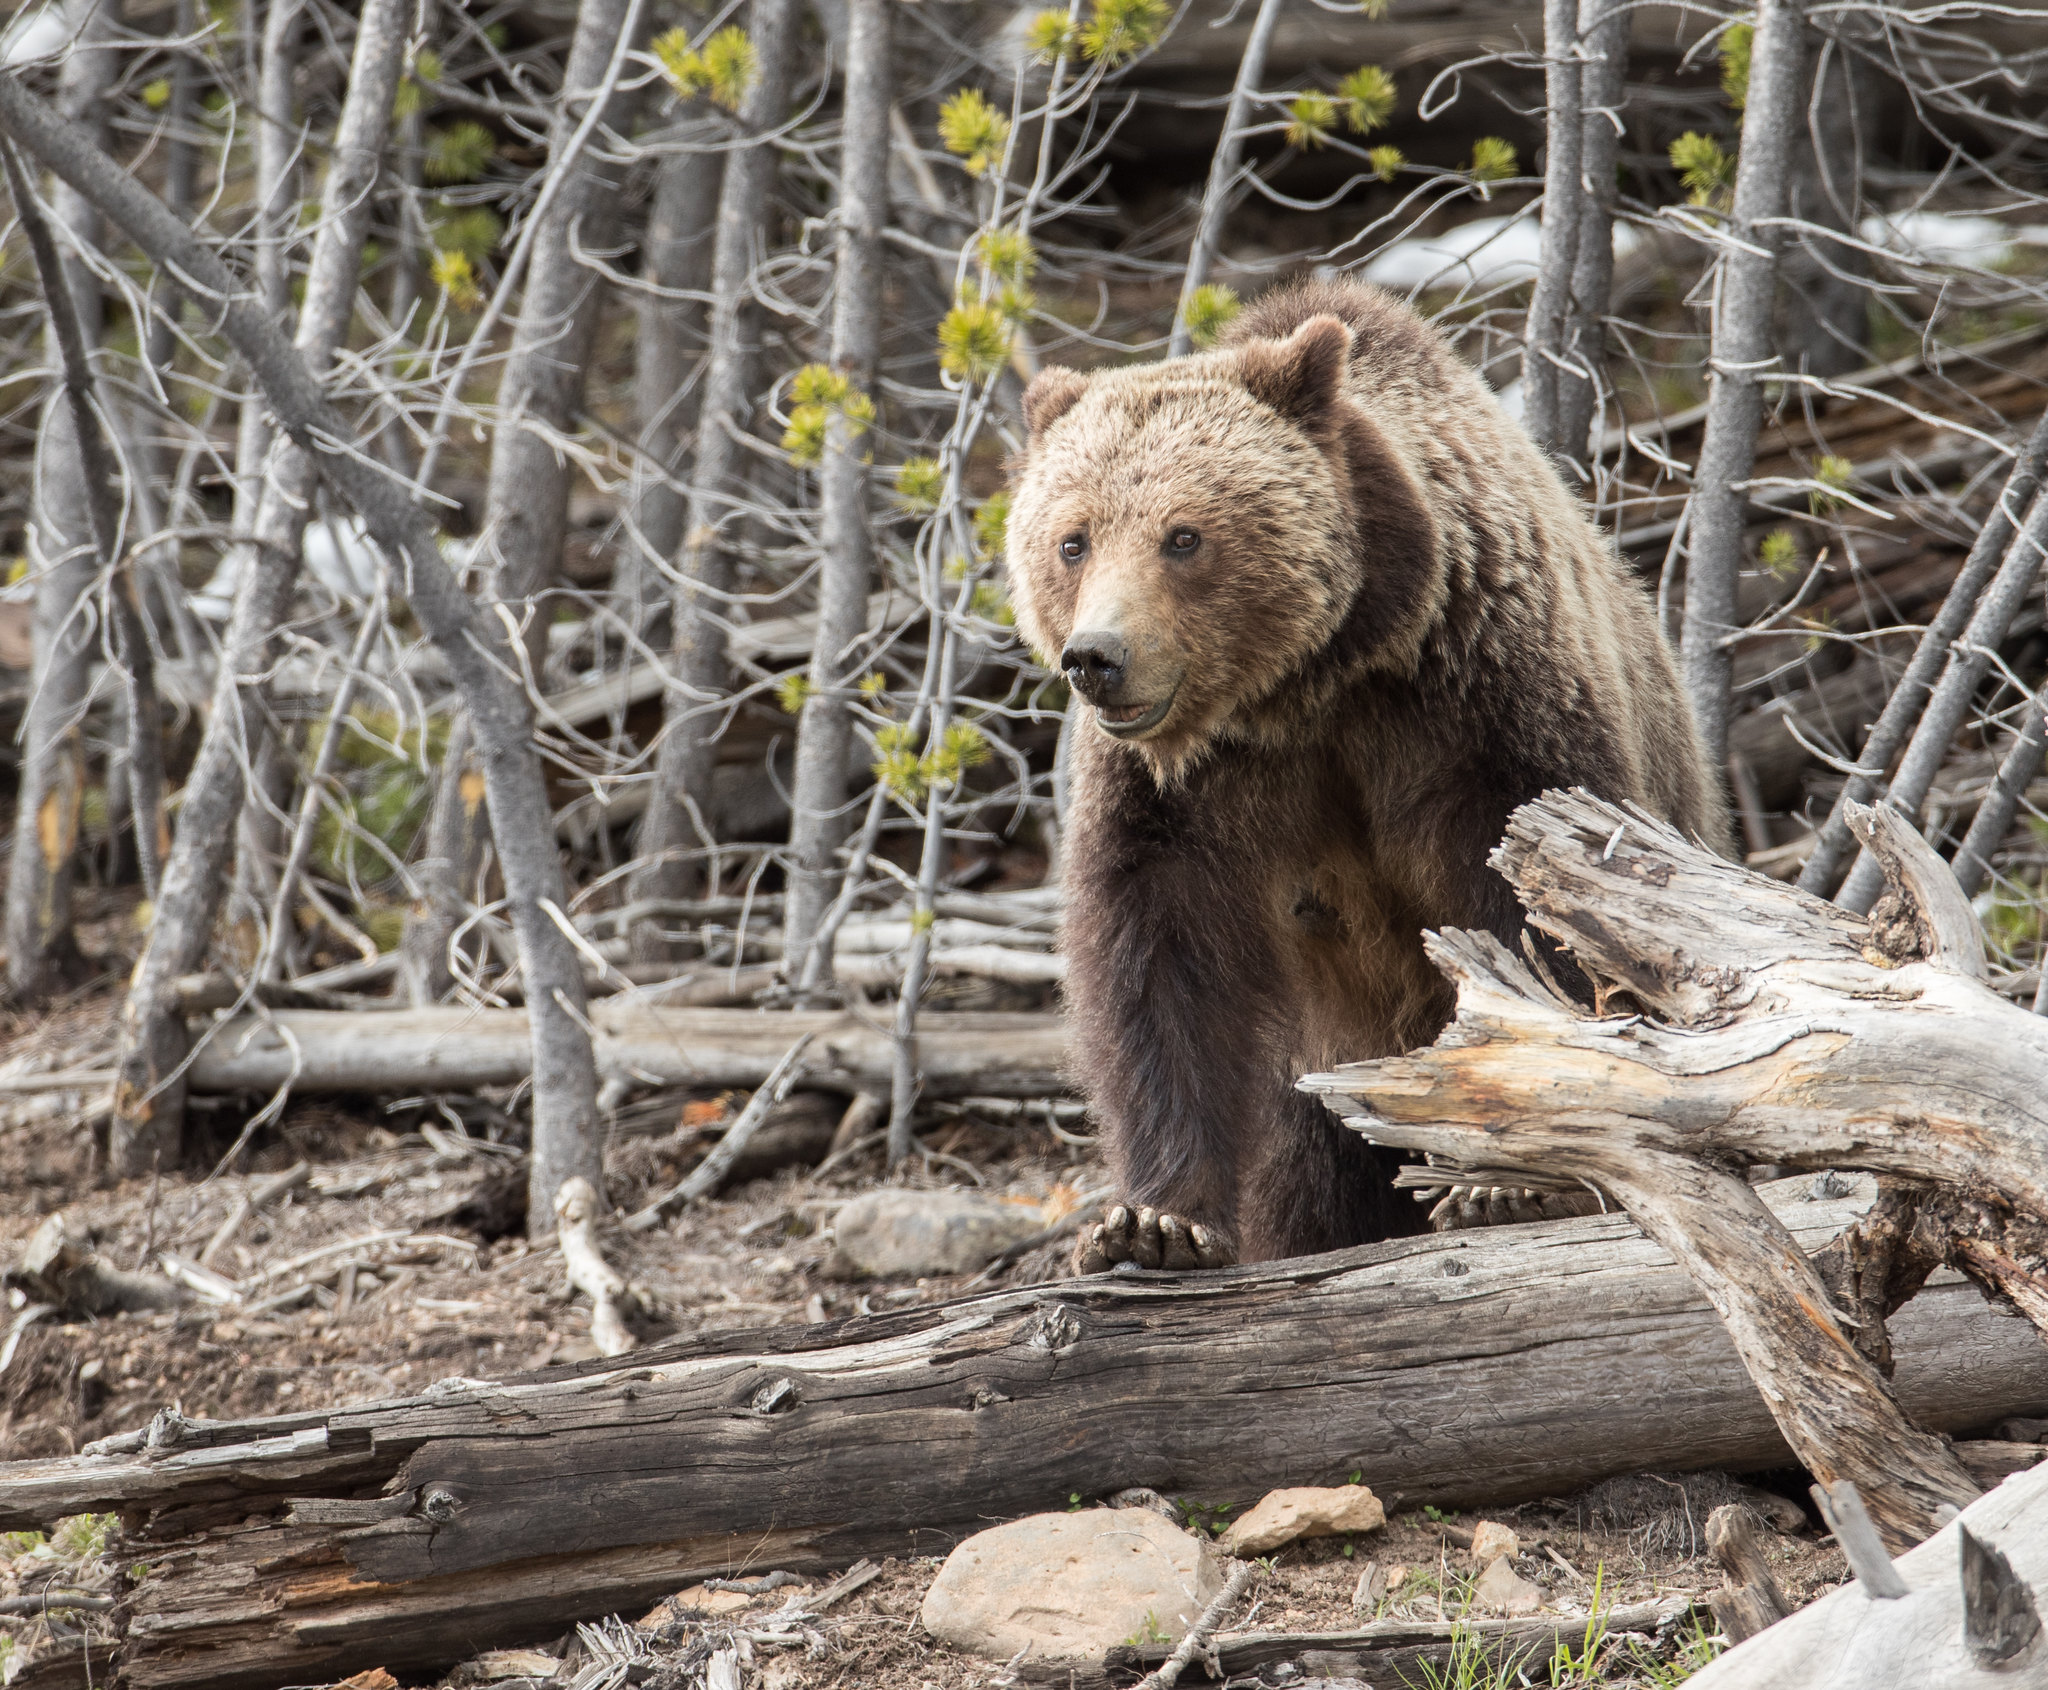 Grizzly bear walking through timber